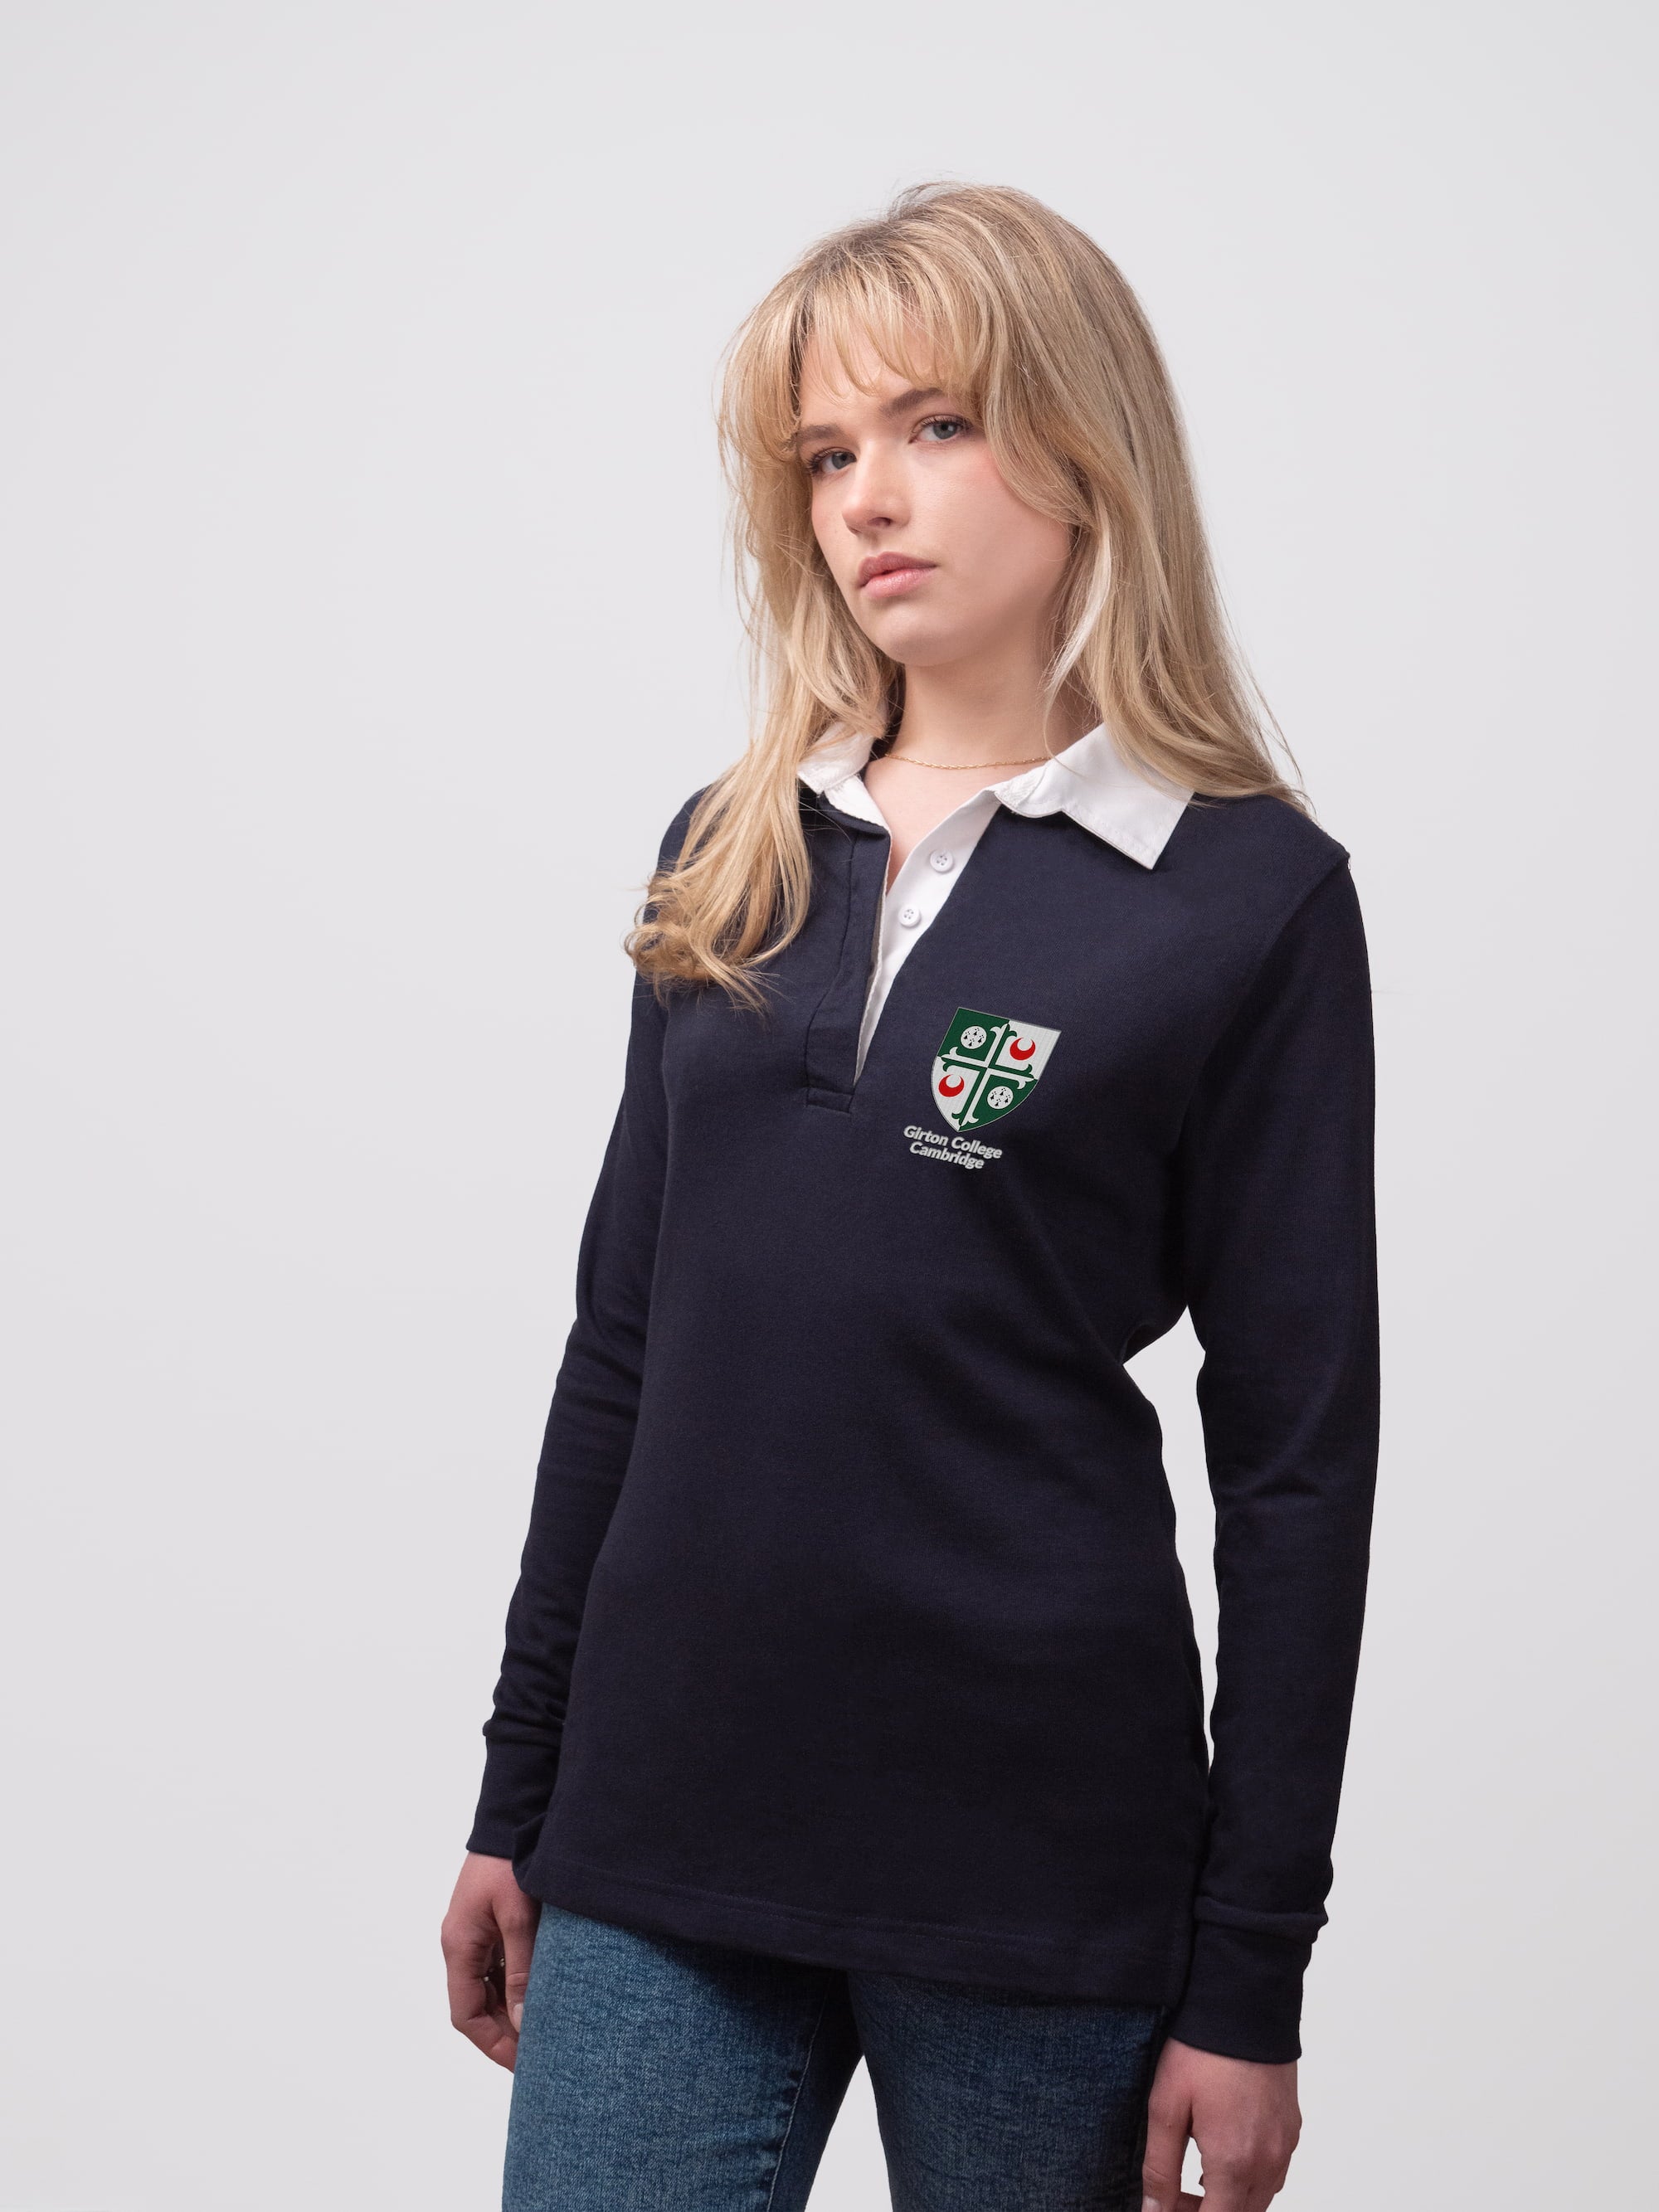 Student wearing a navy Girton College rugby shirt with embroidered crest